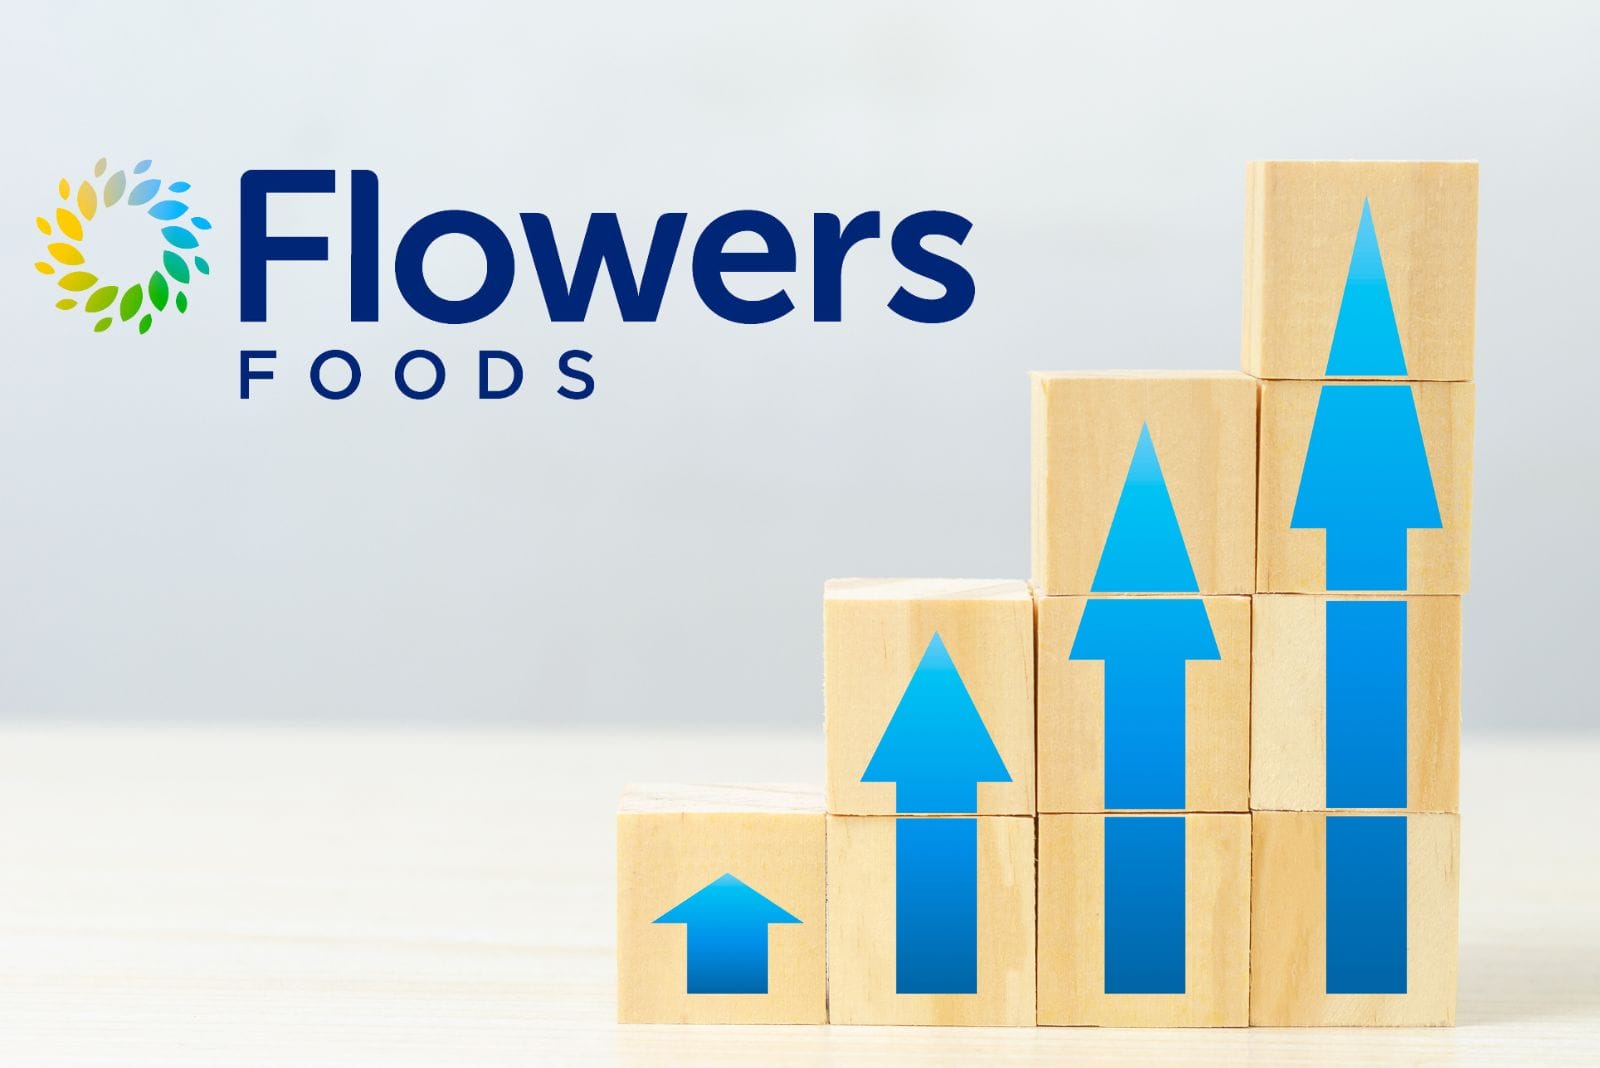 flowers foods logo with generic financial bar chart